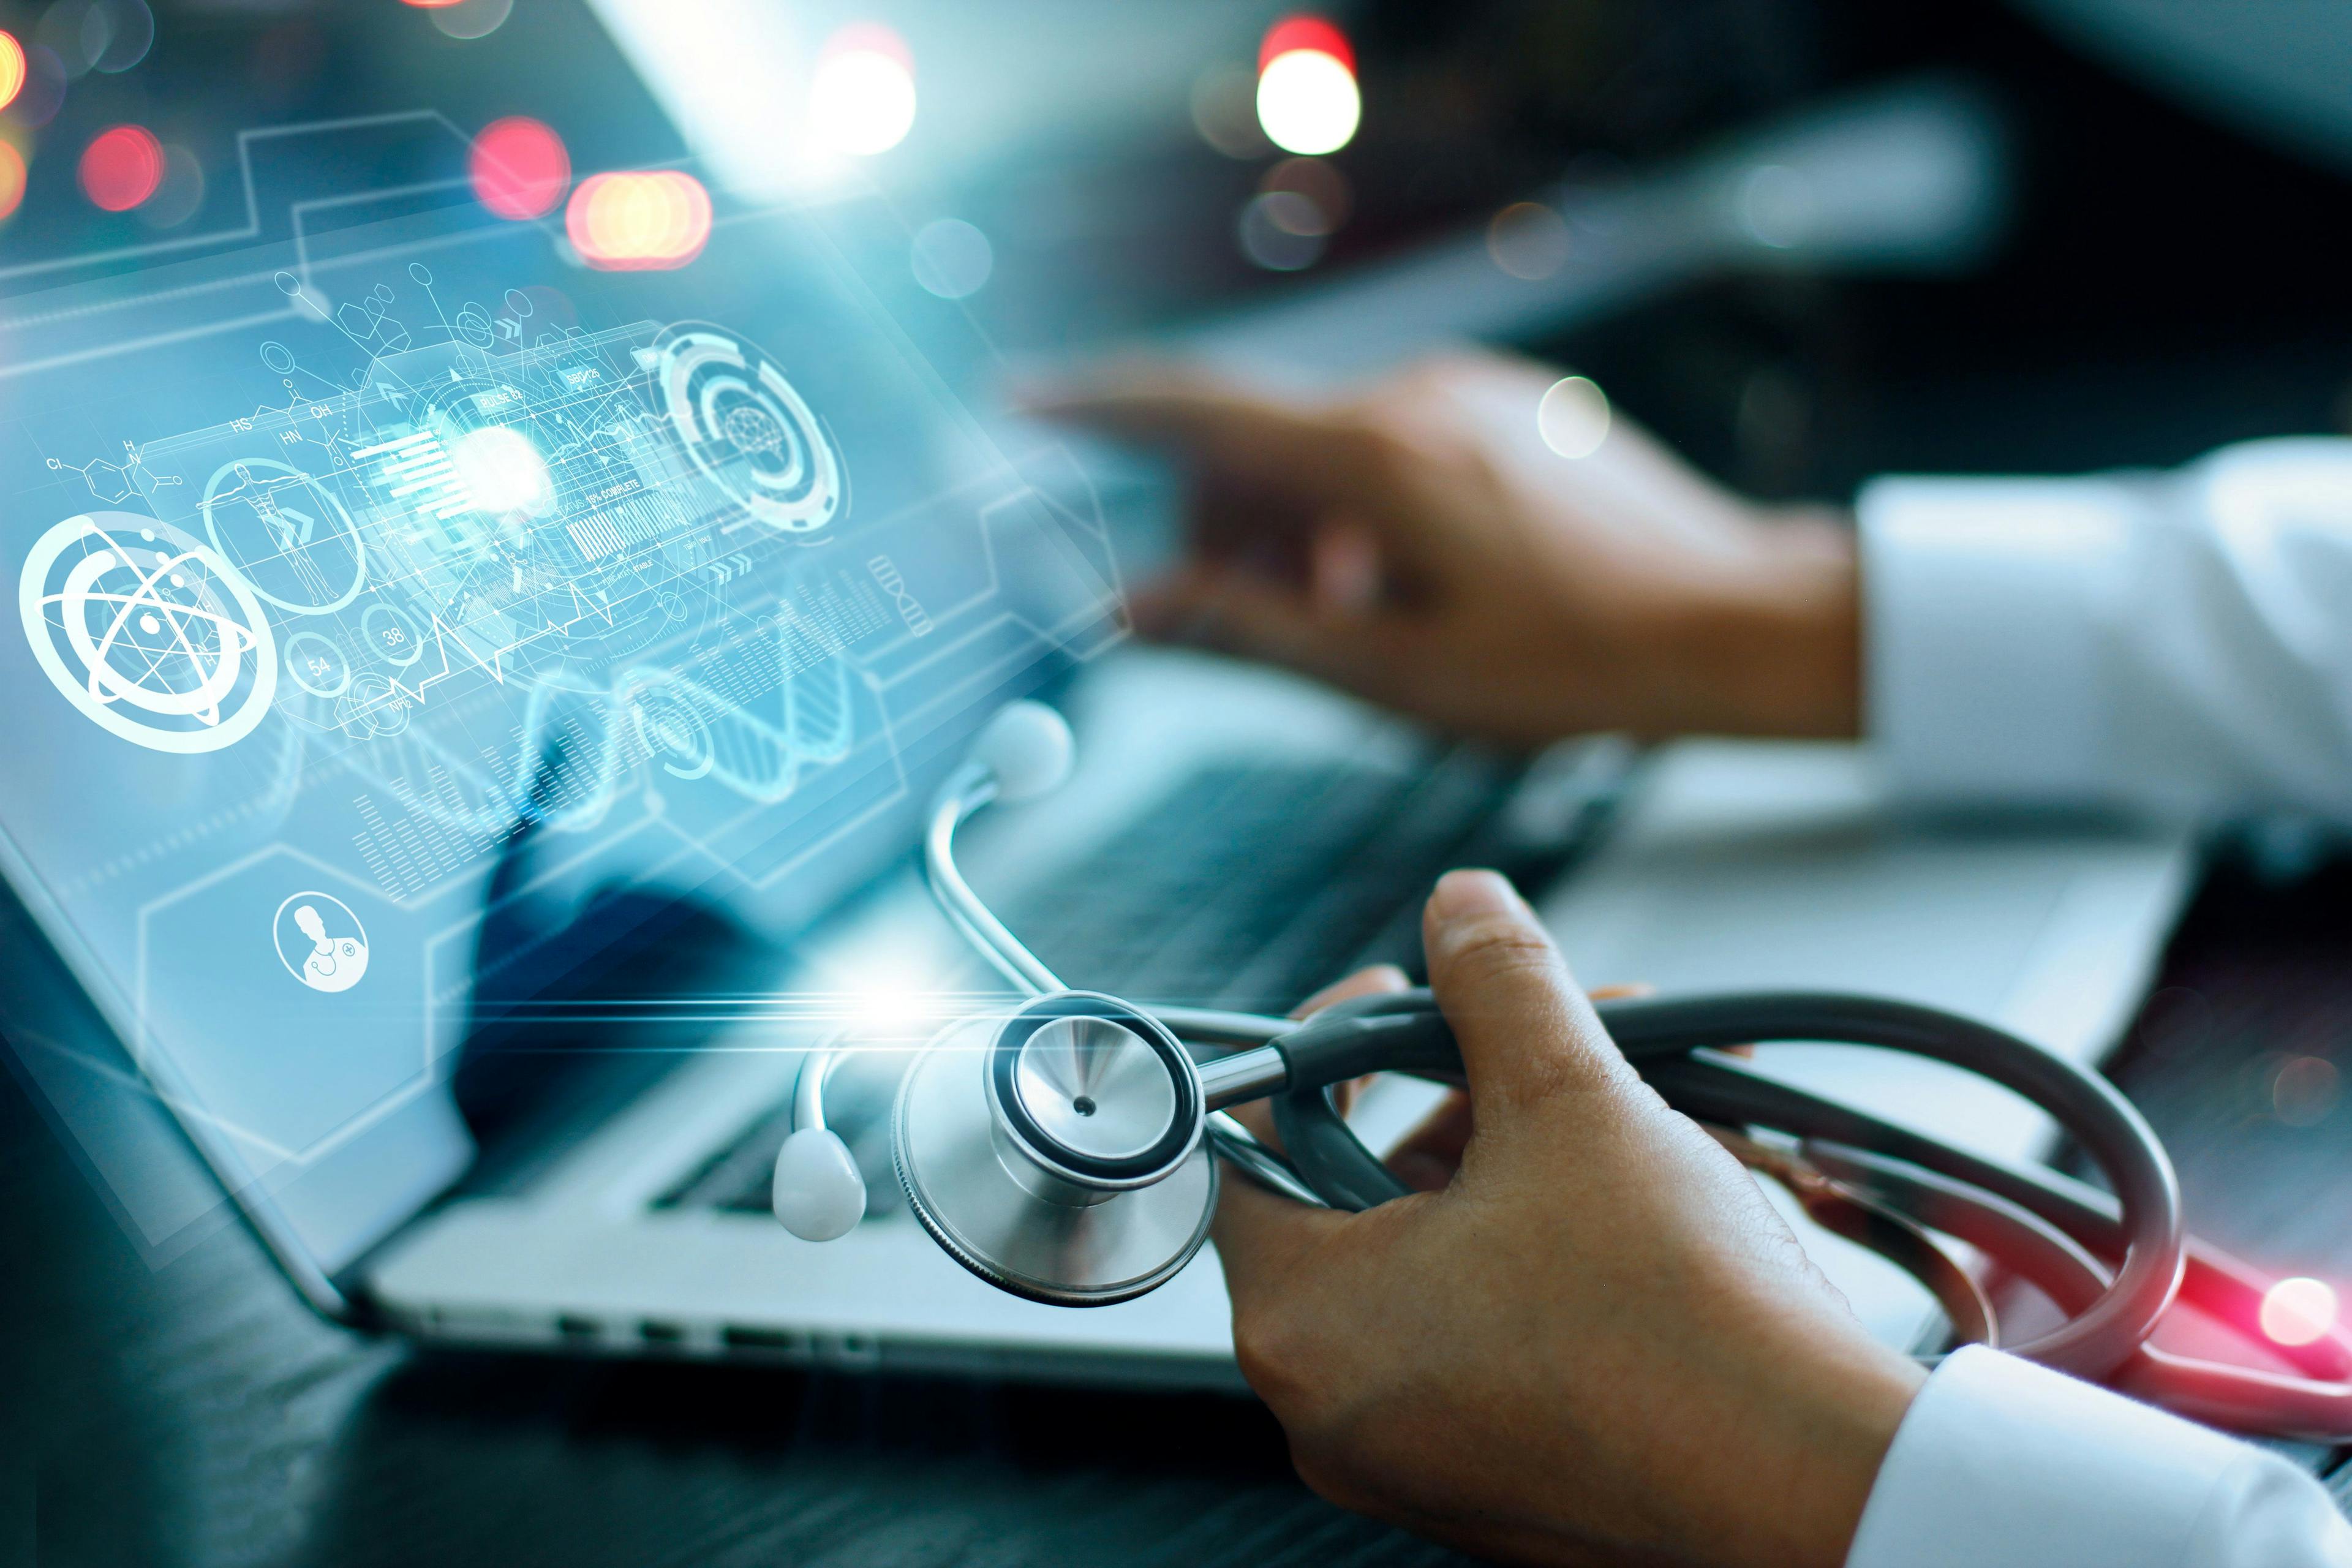 Many hospital systems rely on outdated data archives. Discrete data sets are preferable because they’re detailed, measurable, and reportable. (Image credit: ©ipopba - stock.adobe.com)